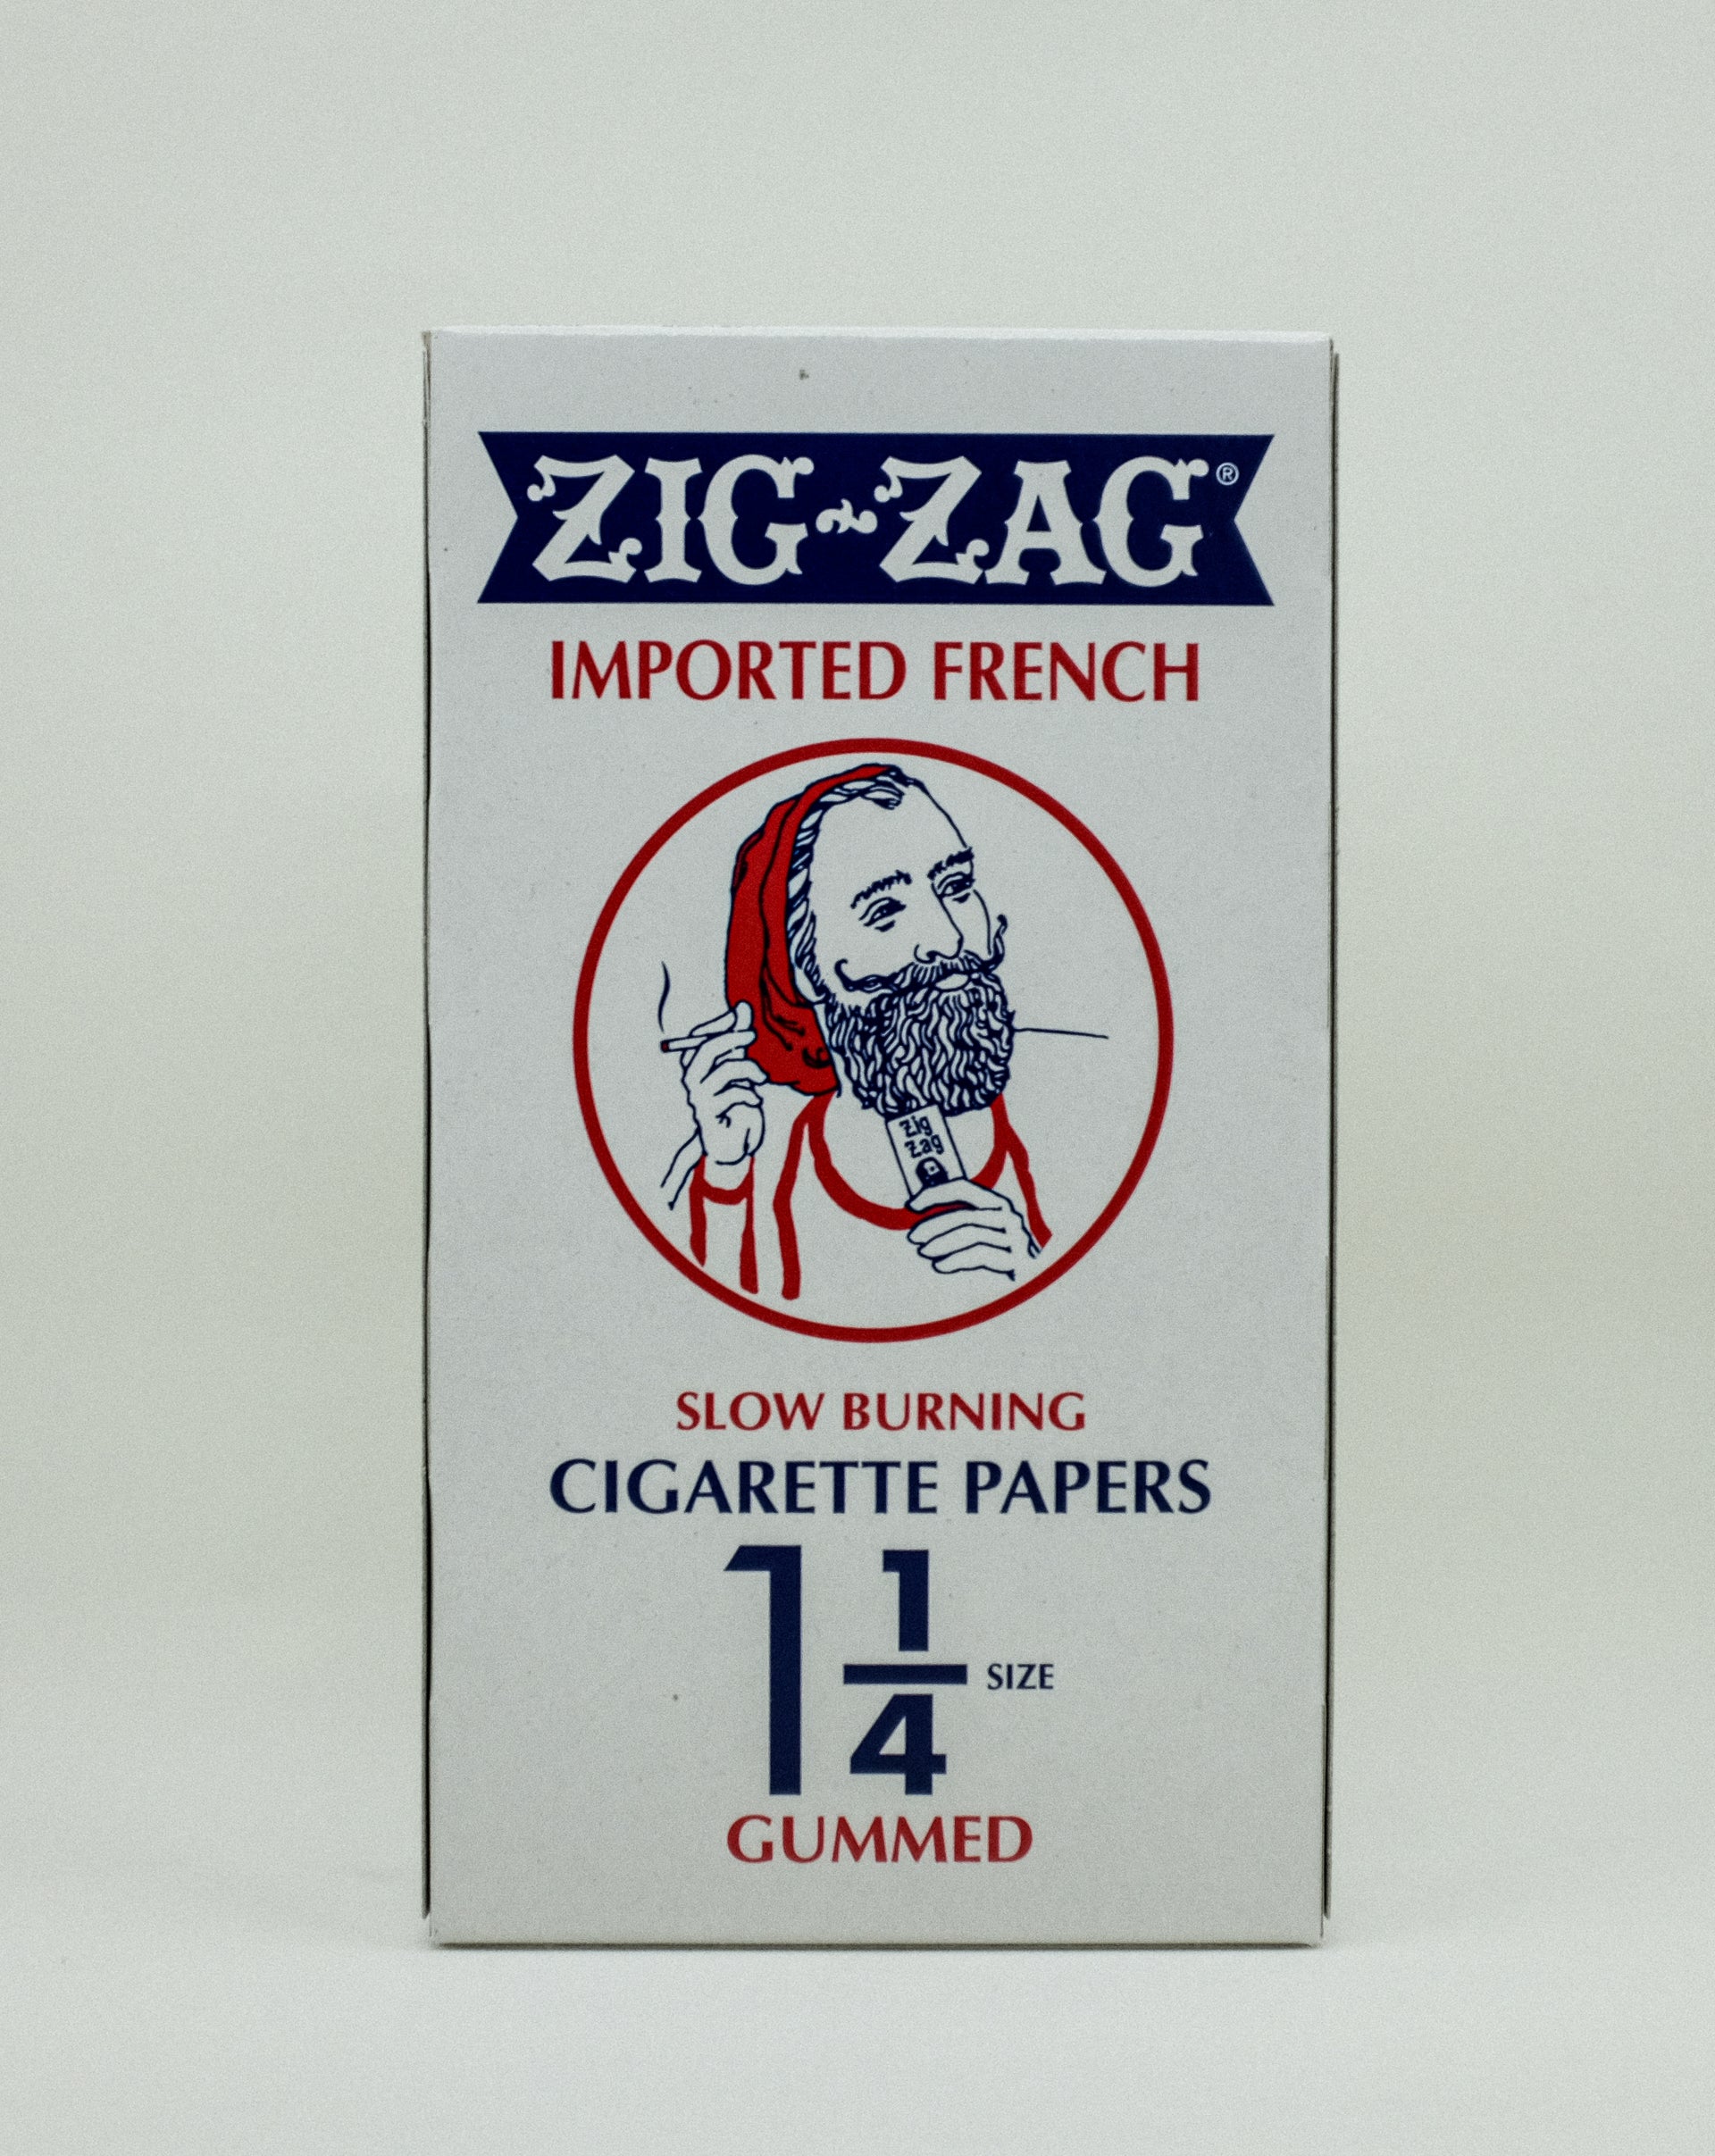 Zig-Zag White Rolling Papers